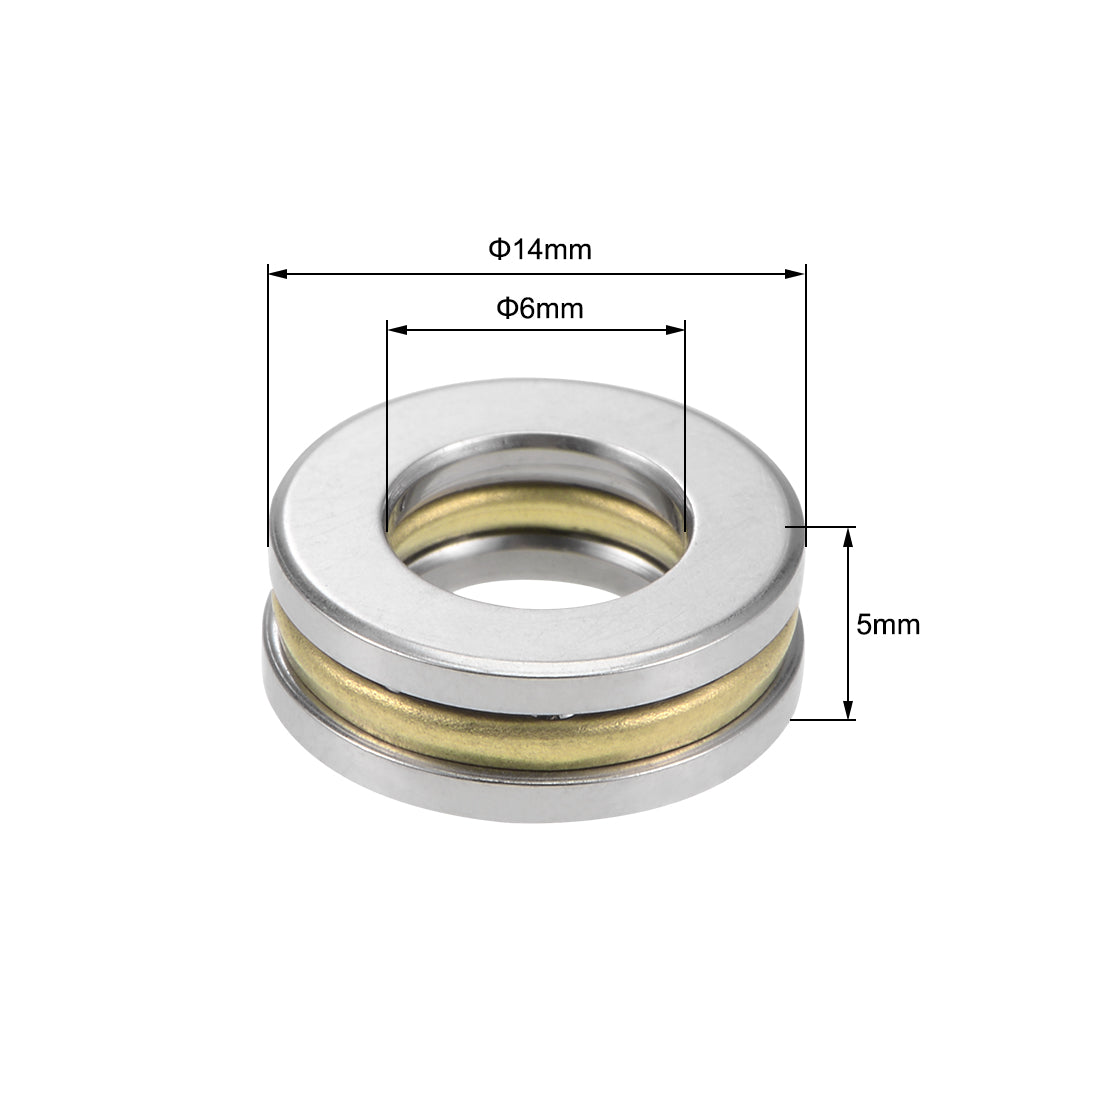 uxcell Uxcell F6-14M Miniature Thrust Ball Bearing 6x14x5mm Chrome Steel with Washer 10Pcs